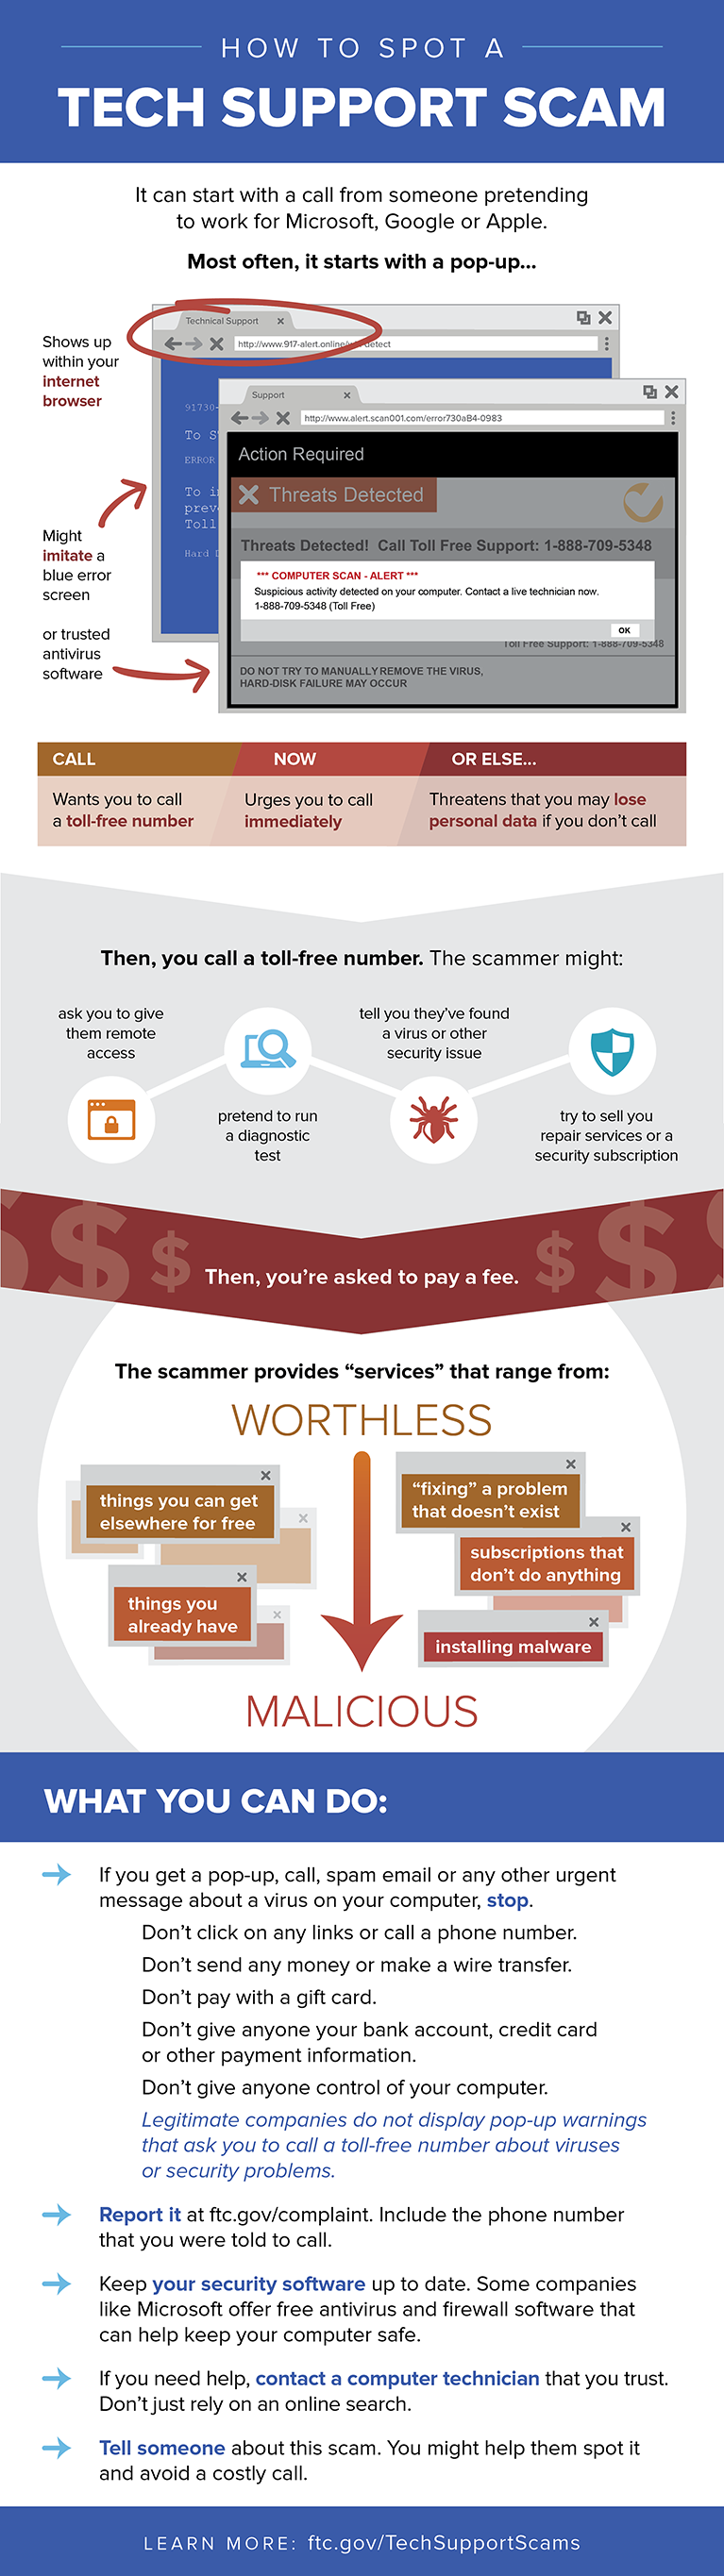 tech-support-scam-infographic